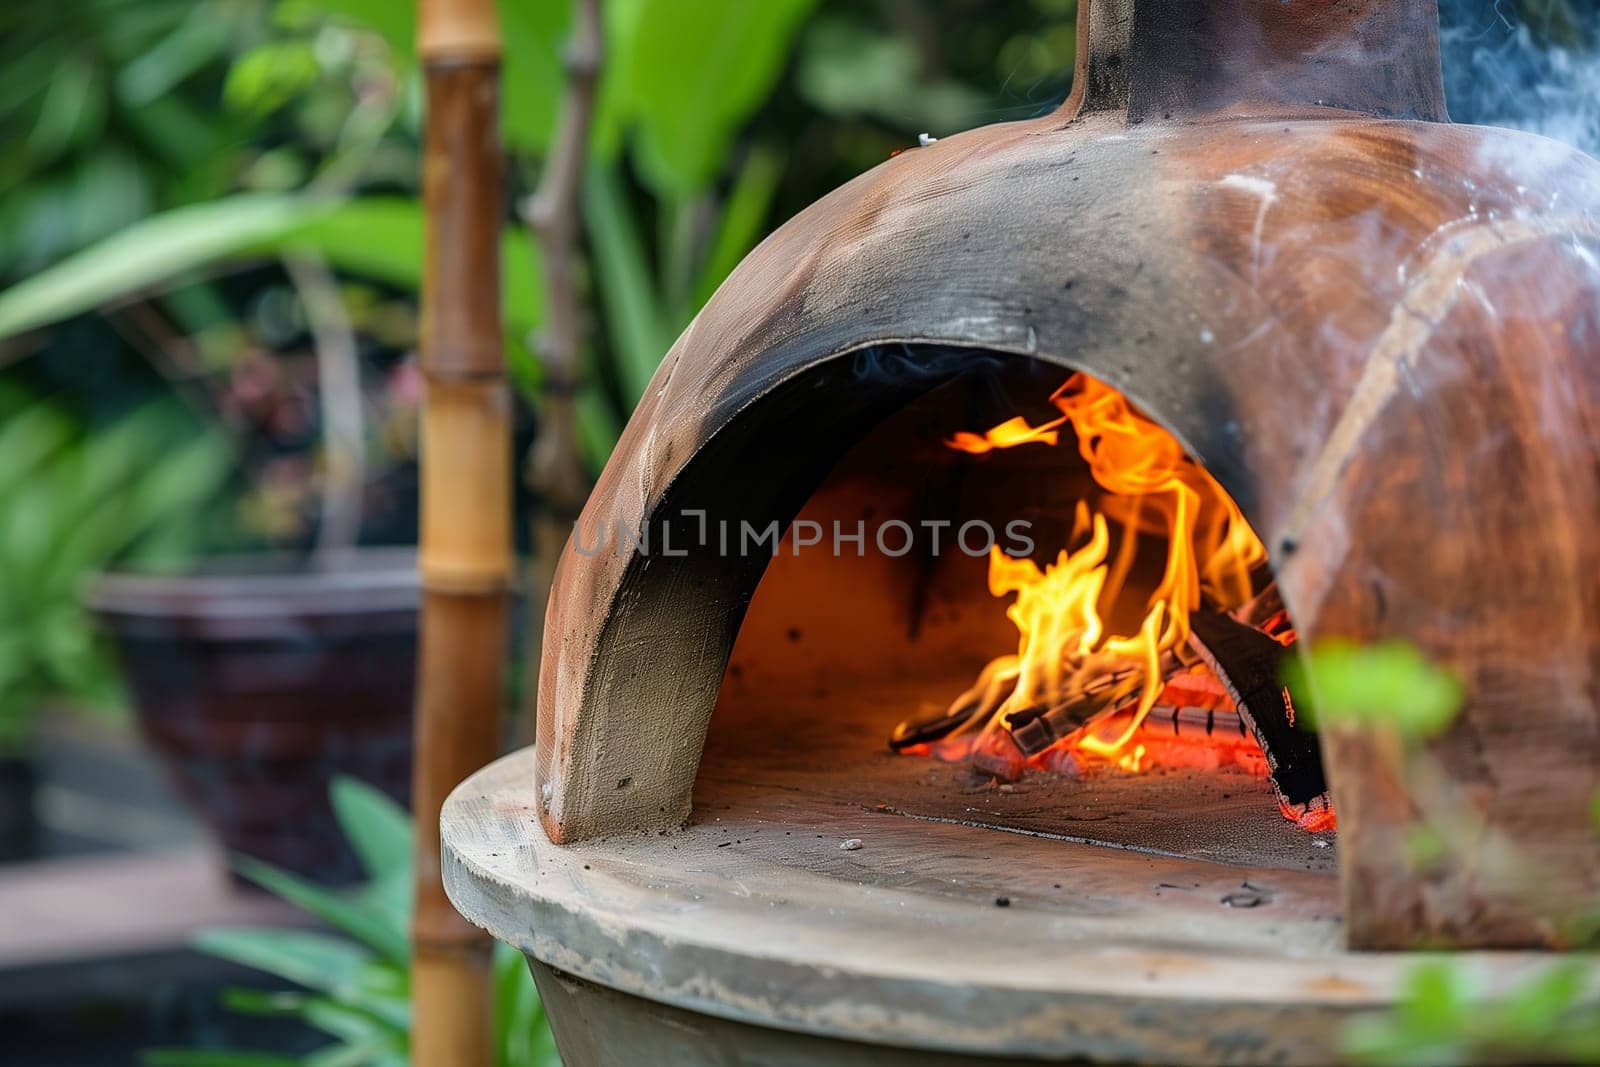 Flames blazing inside a traditional stone oven, creating a fierce and intense heat for cooking.